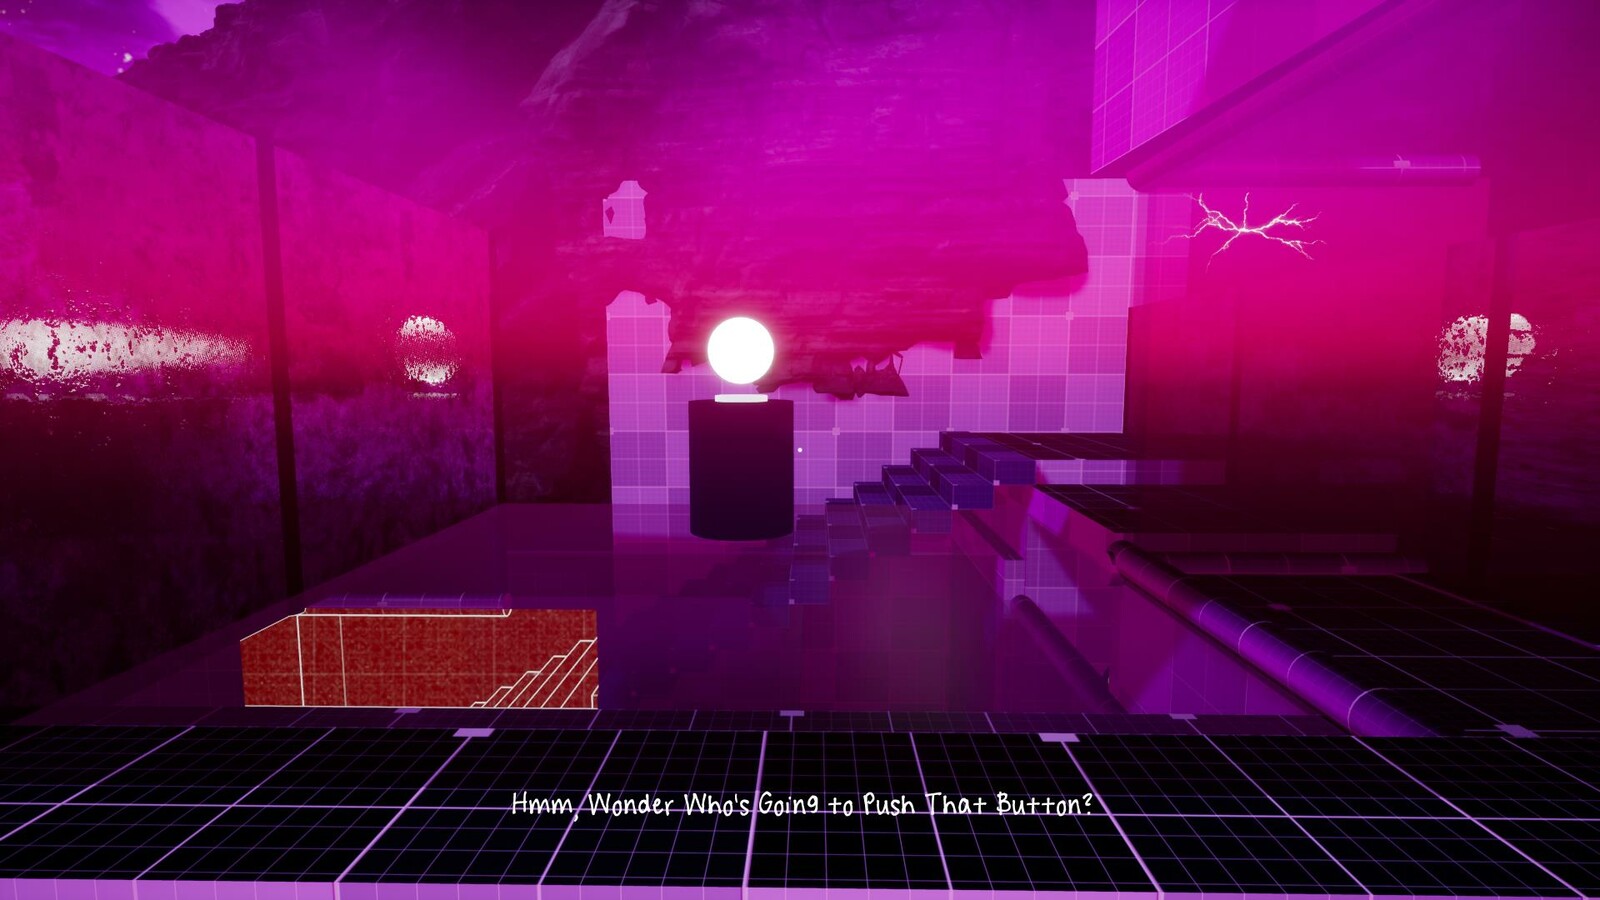 In the first section of Playtesting, the player can see an Activator blocked off with glass. They must figure out how to reach it.